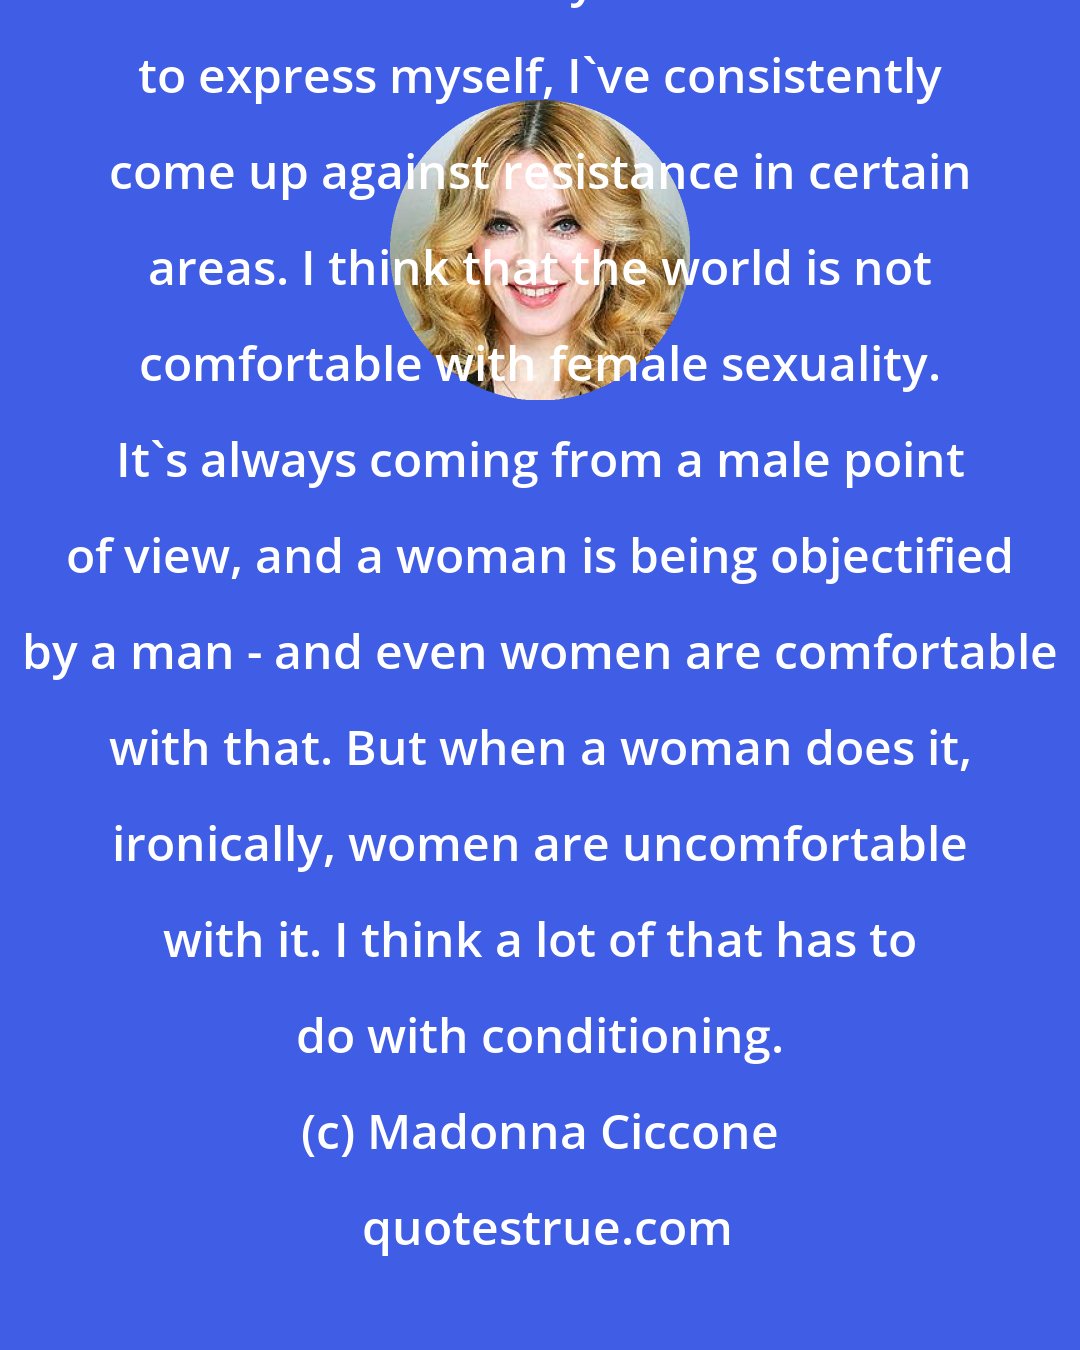 Madonna Ciccone: I think it's just that as a creative person, in all the different things that I've done or ways that I've found to express myself, I've consistently come up against resistance in certain areas. I think that the world is not comfortable with female sexuality. It's always coming from a male point of view, and a woman is being objectified by a man - and even women are comfortable with that. But when a woman does it, ironically, women are uncomfortable with it. I think a lot of that has to do with conditioning.